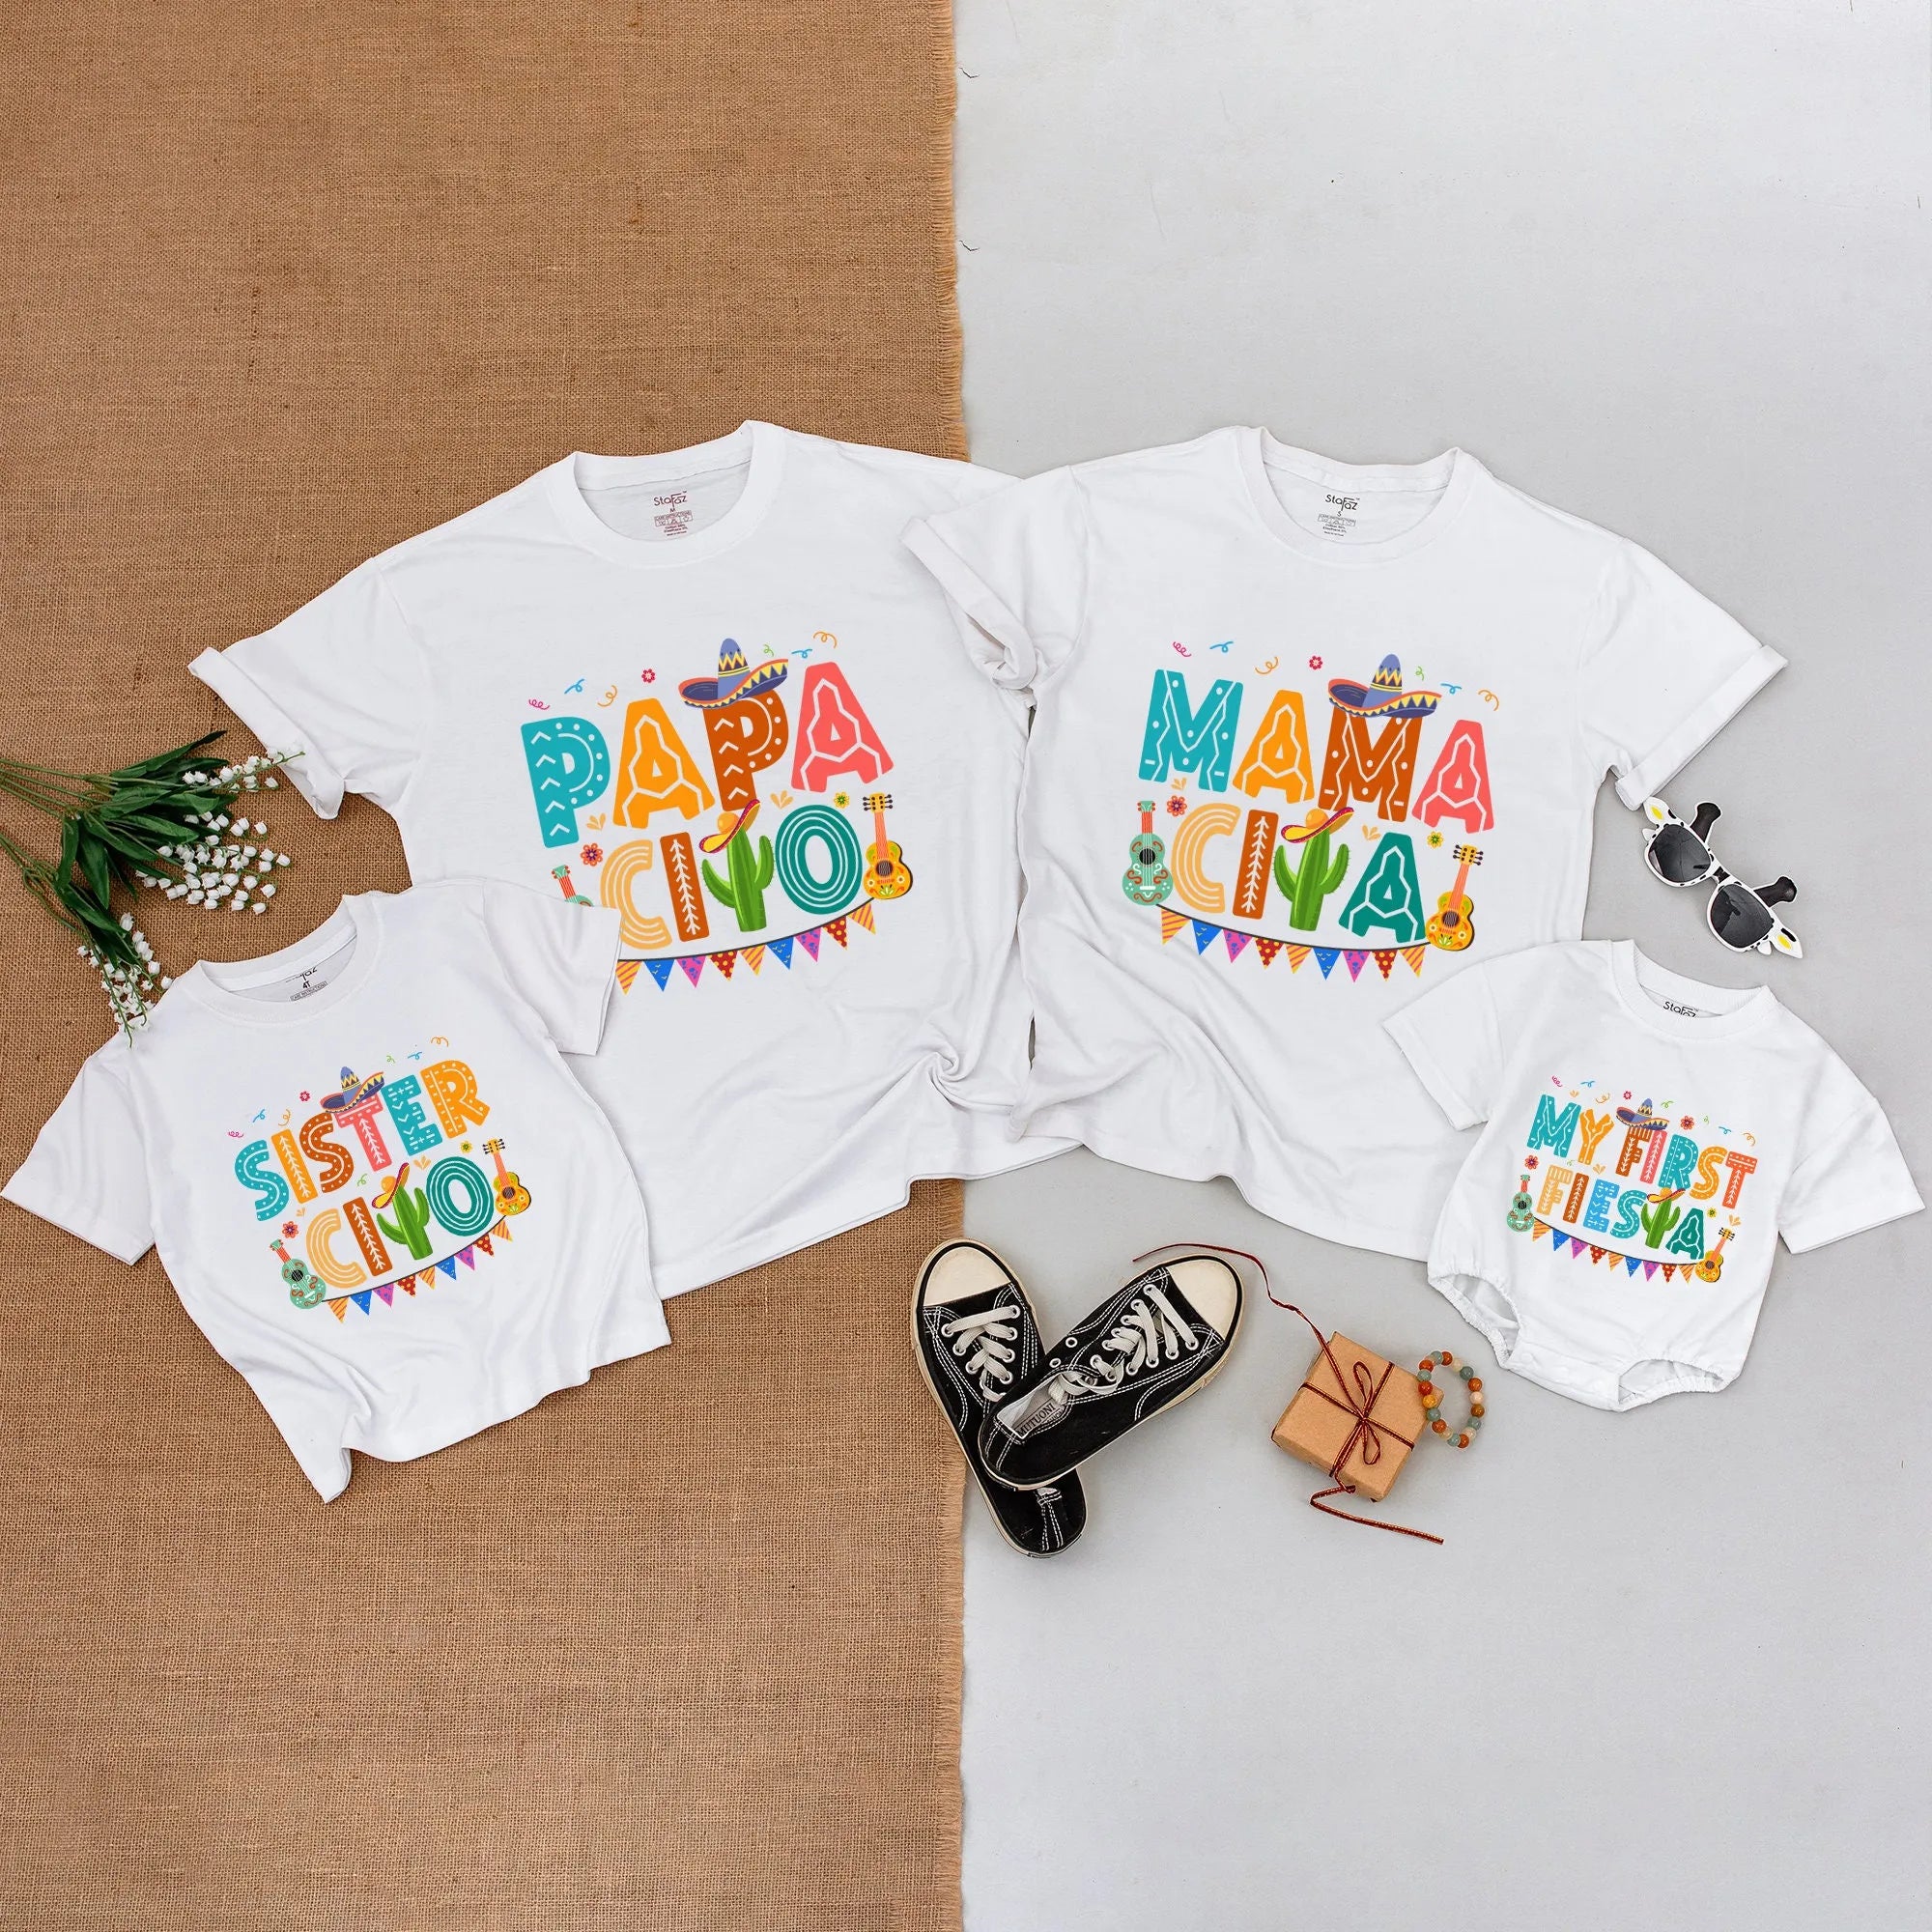 Uno Fiesta Birthday T-Shirt: Family Matching Baby Romper Outfits!